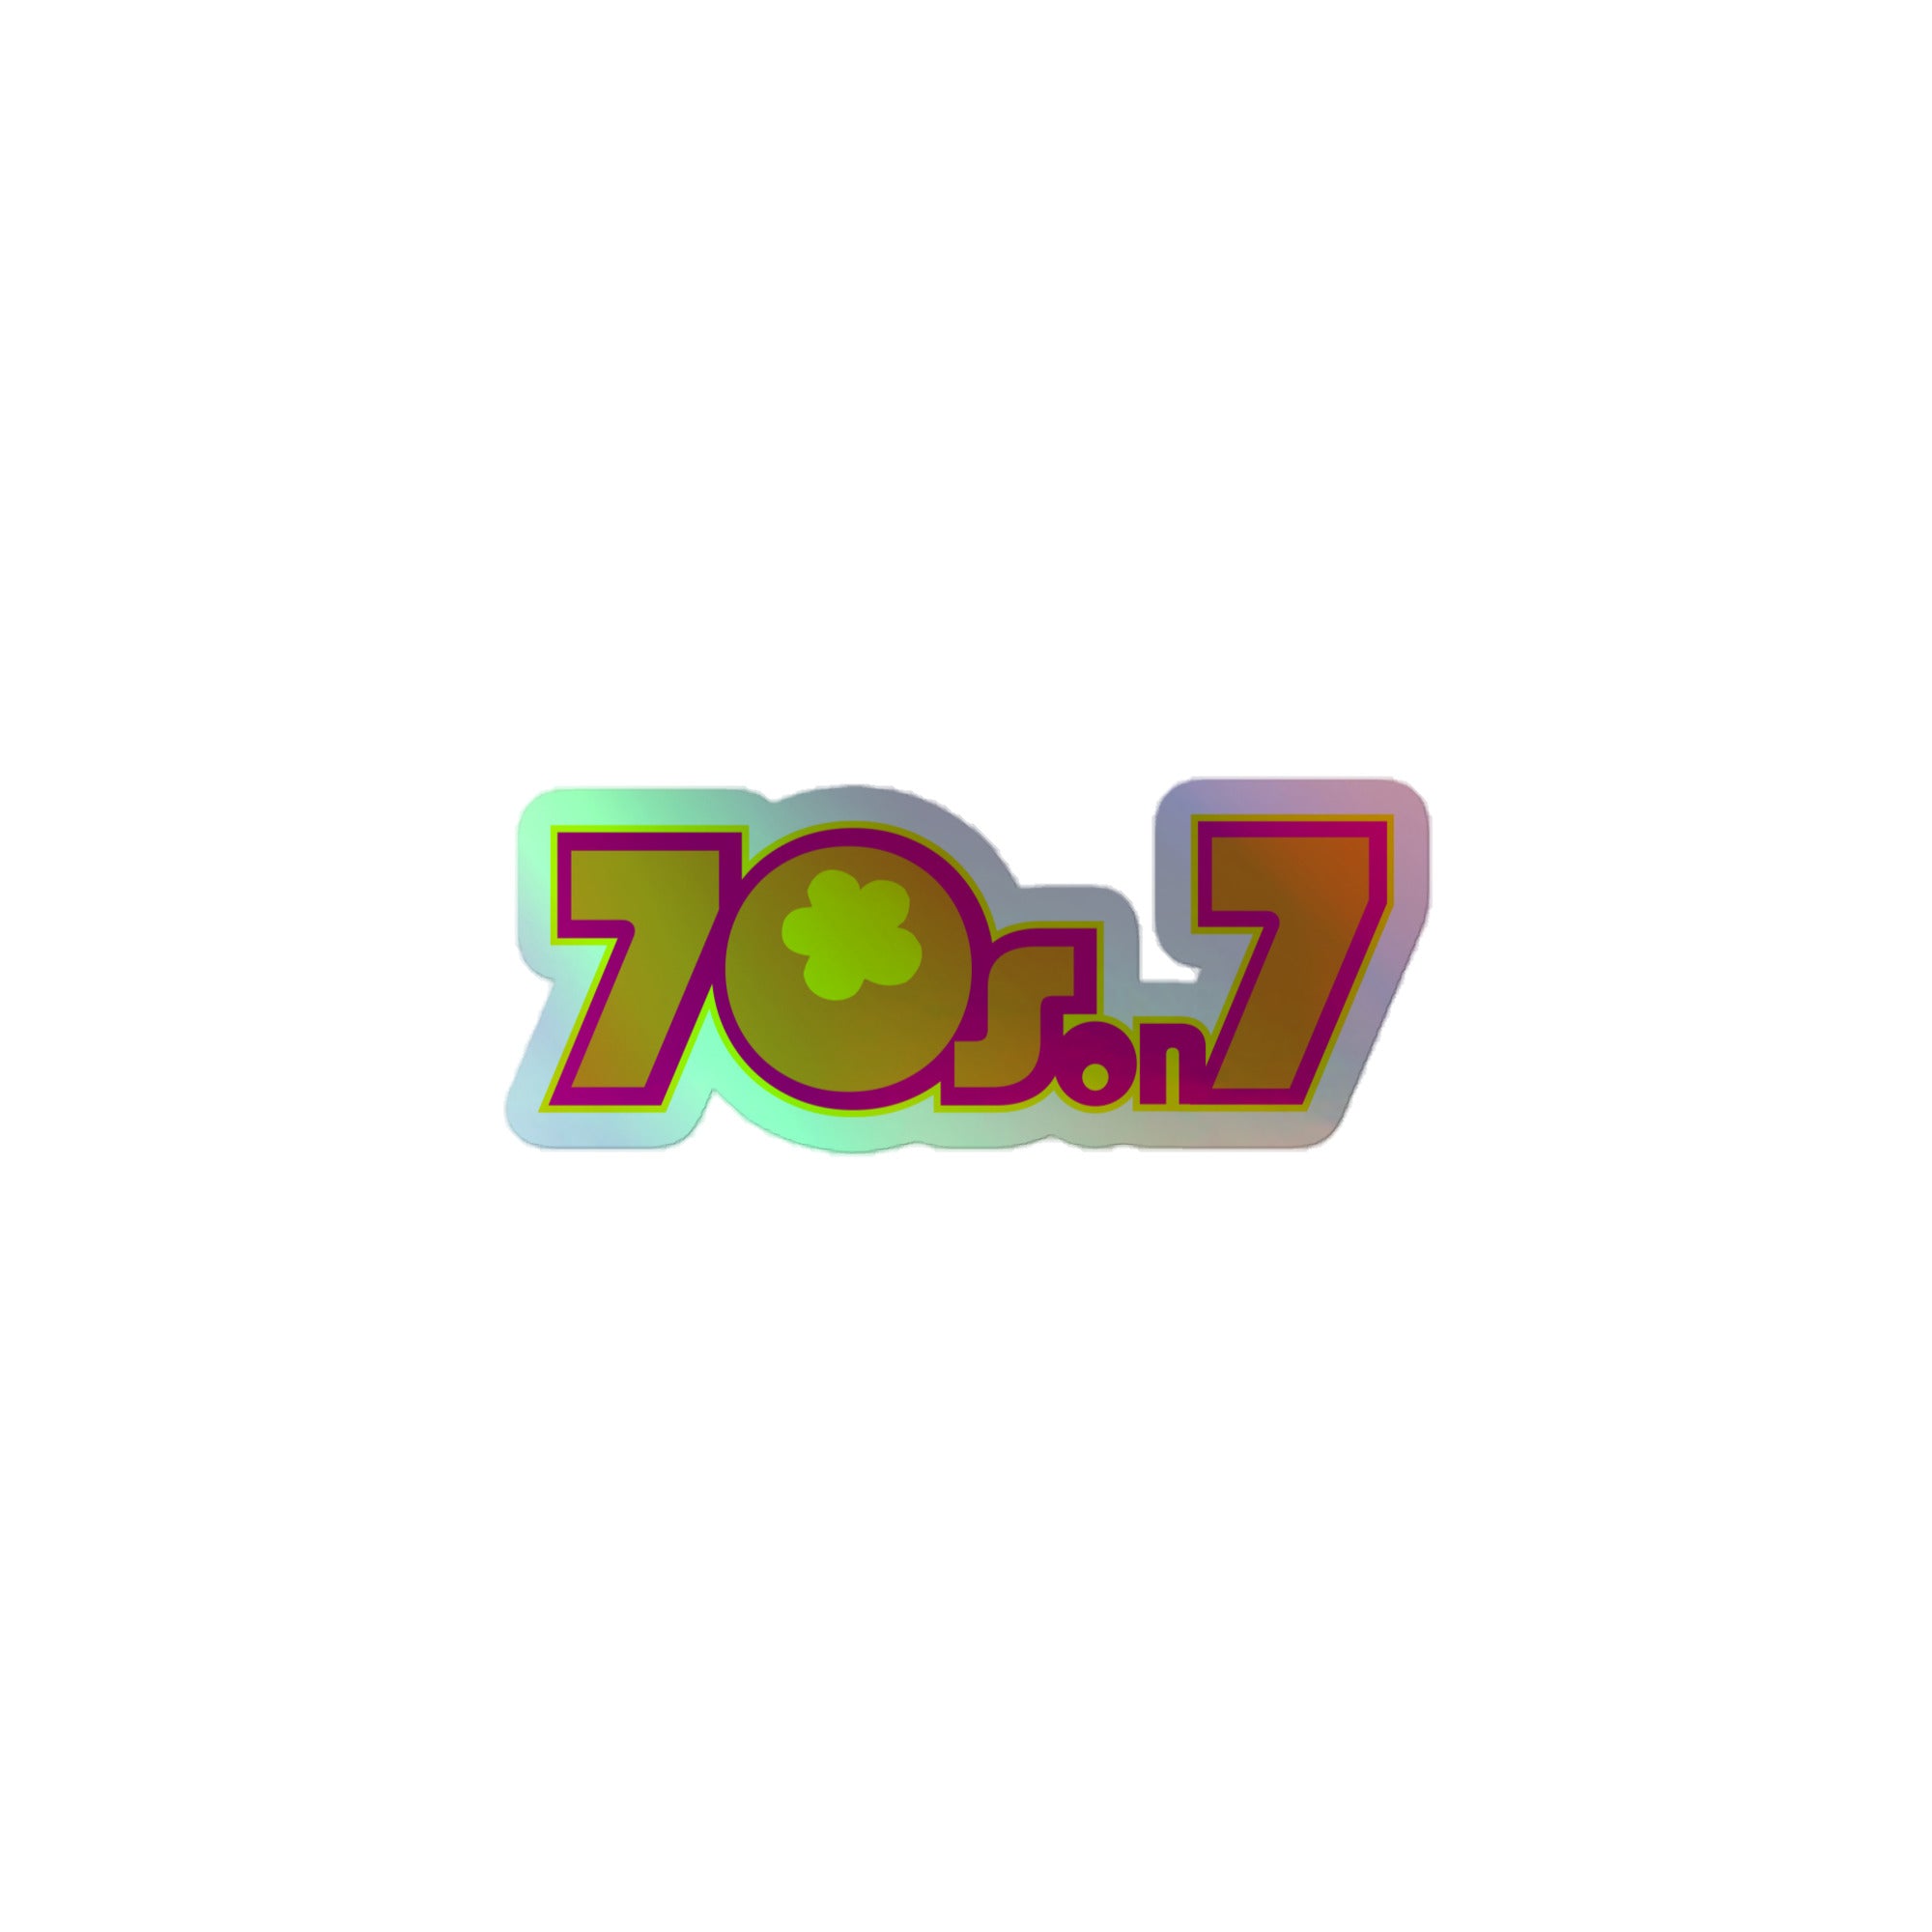 70s on 7: Holographic Sticker